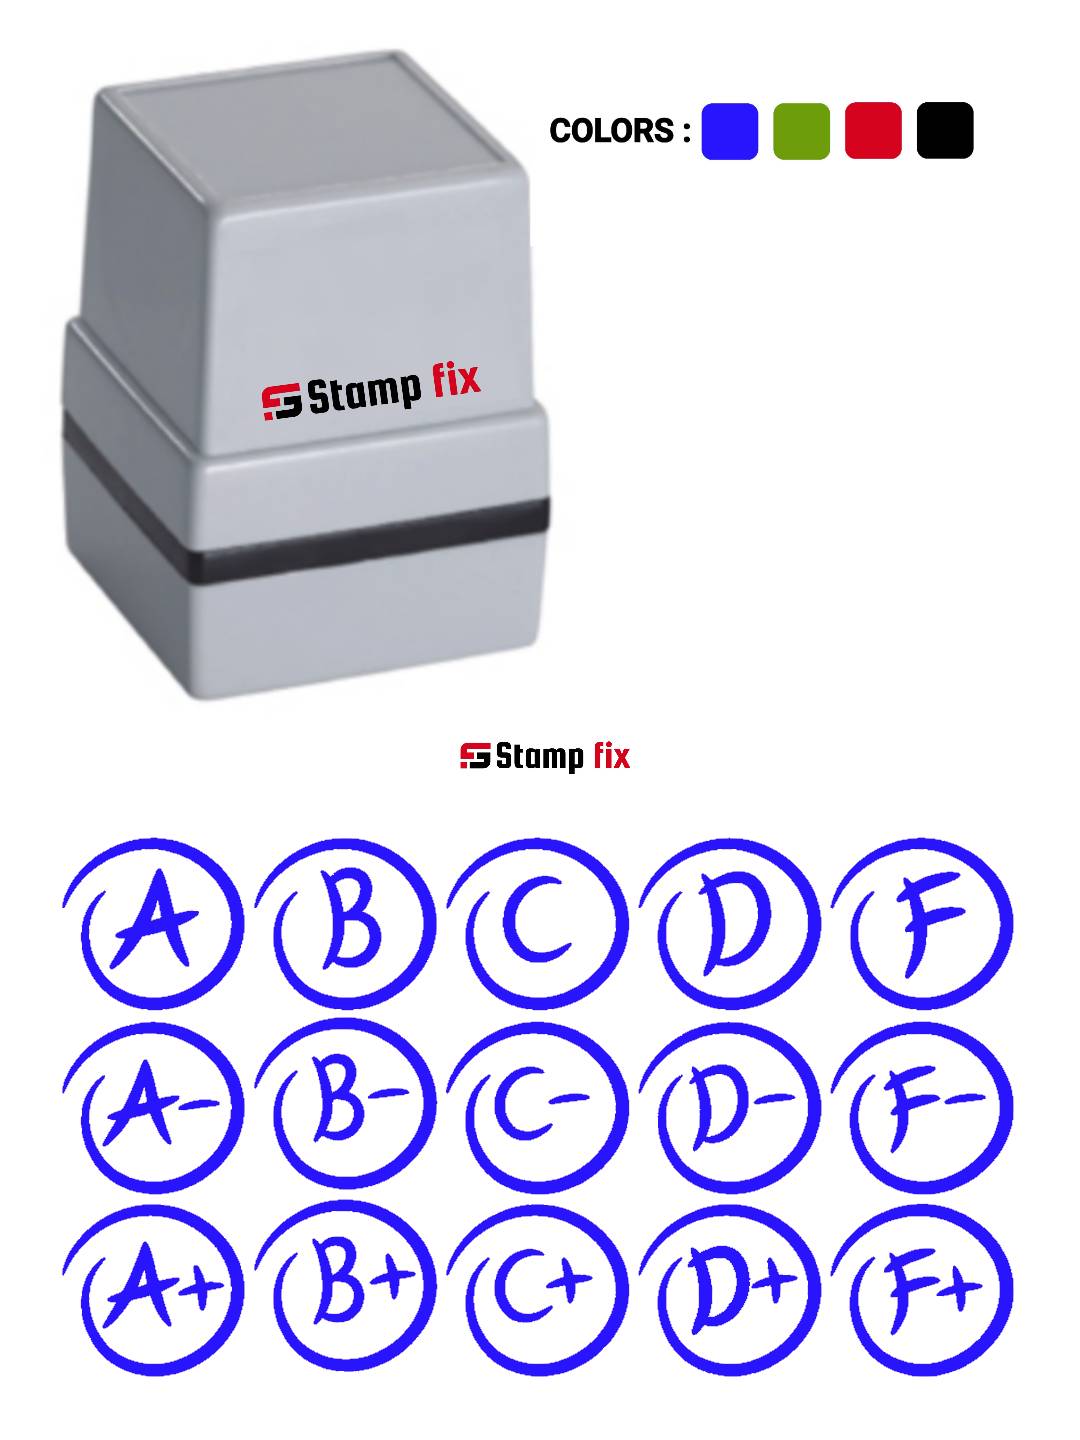 Pre Ink teachers grade stamp, tecahers stamp, school stamp, mark stamp, grade stamp, remark stamp , teachers easy stamp, teachers checking stamp, teachers marking stamp, Stamp by StampFix, a self-inking stamp with high-quality impressions
in India, nylon stamp, rubber stamp, pre ink stamp, polymer stamp, urgent stamp